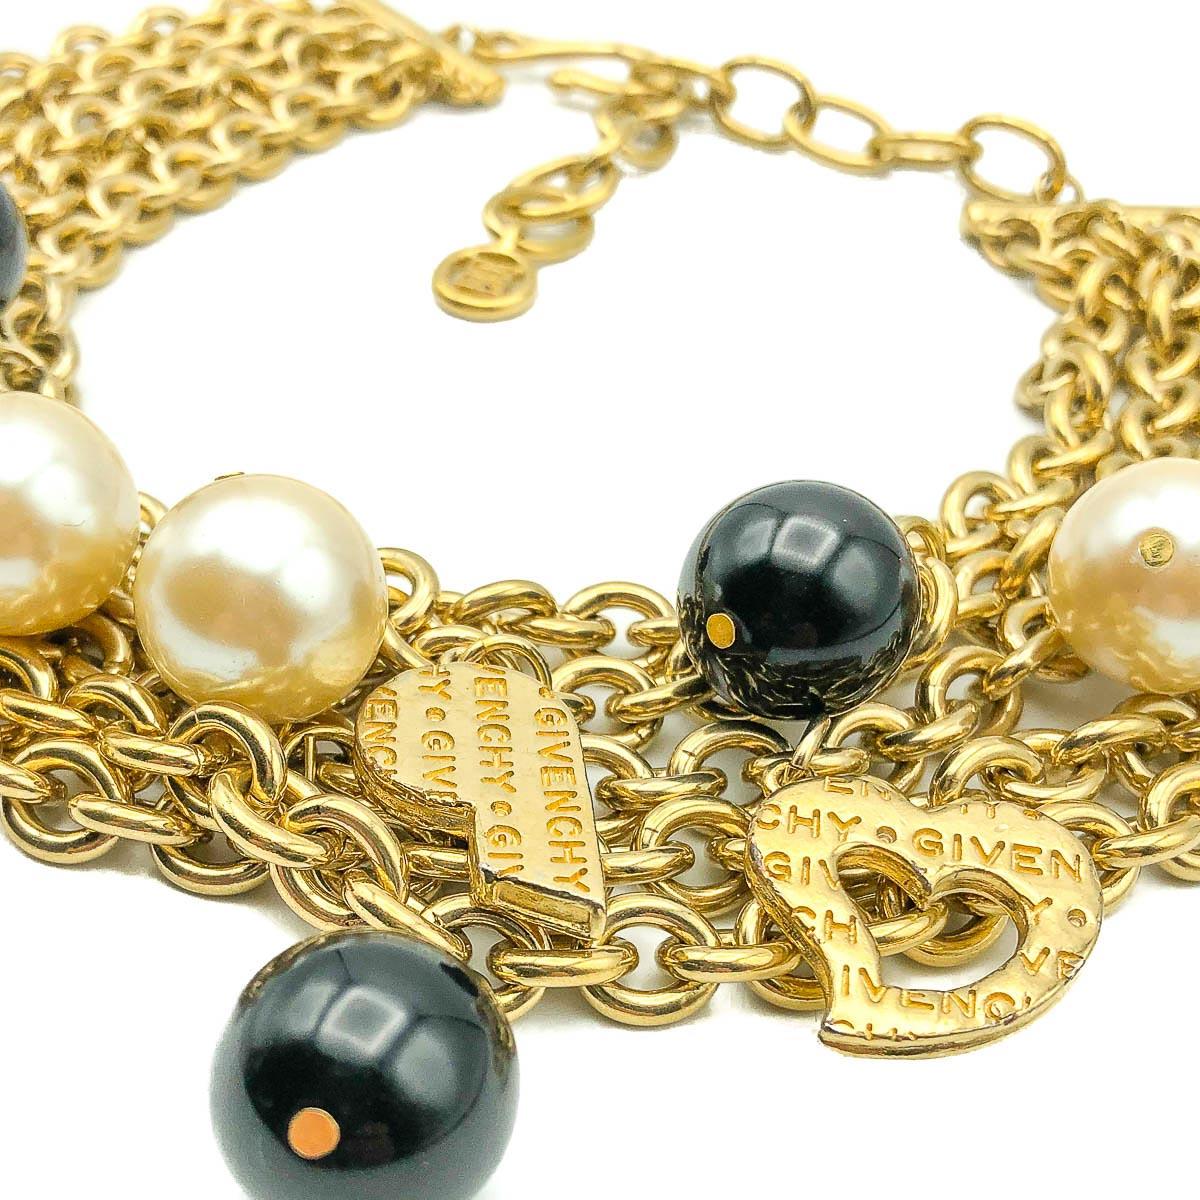 Nothing short of massive this Vintage Givenchy Chain Charm Collar is a fabulous find. Crafted in gold plated metal and resin beads. Featuring five fabulous chunky chains dropping with twelve charms including black and pearl resin beads, logo